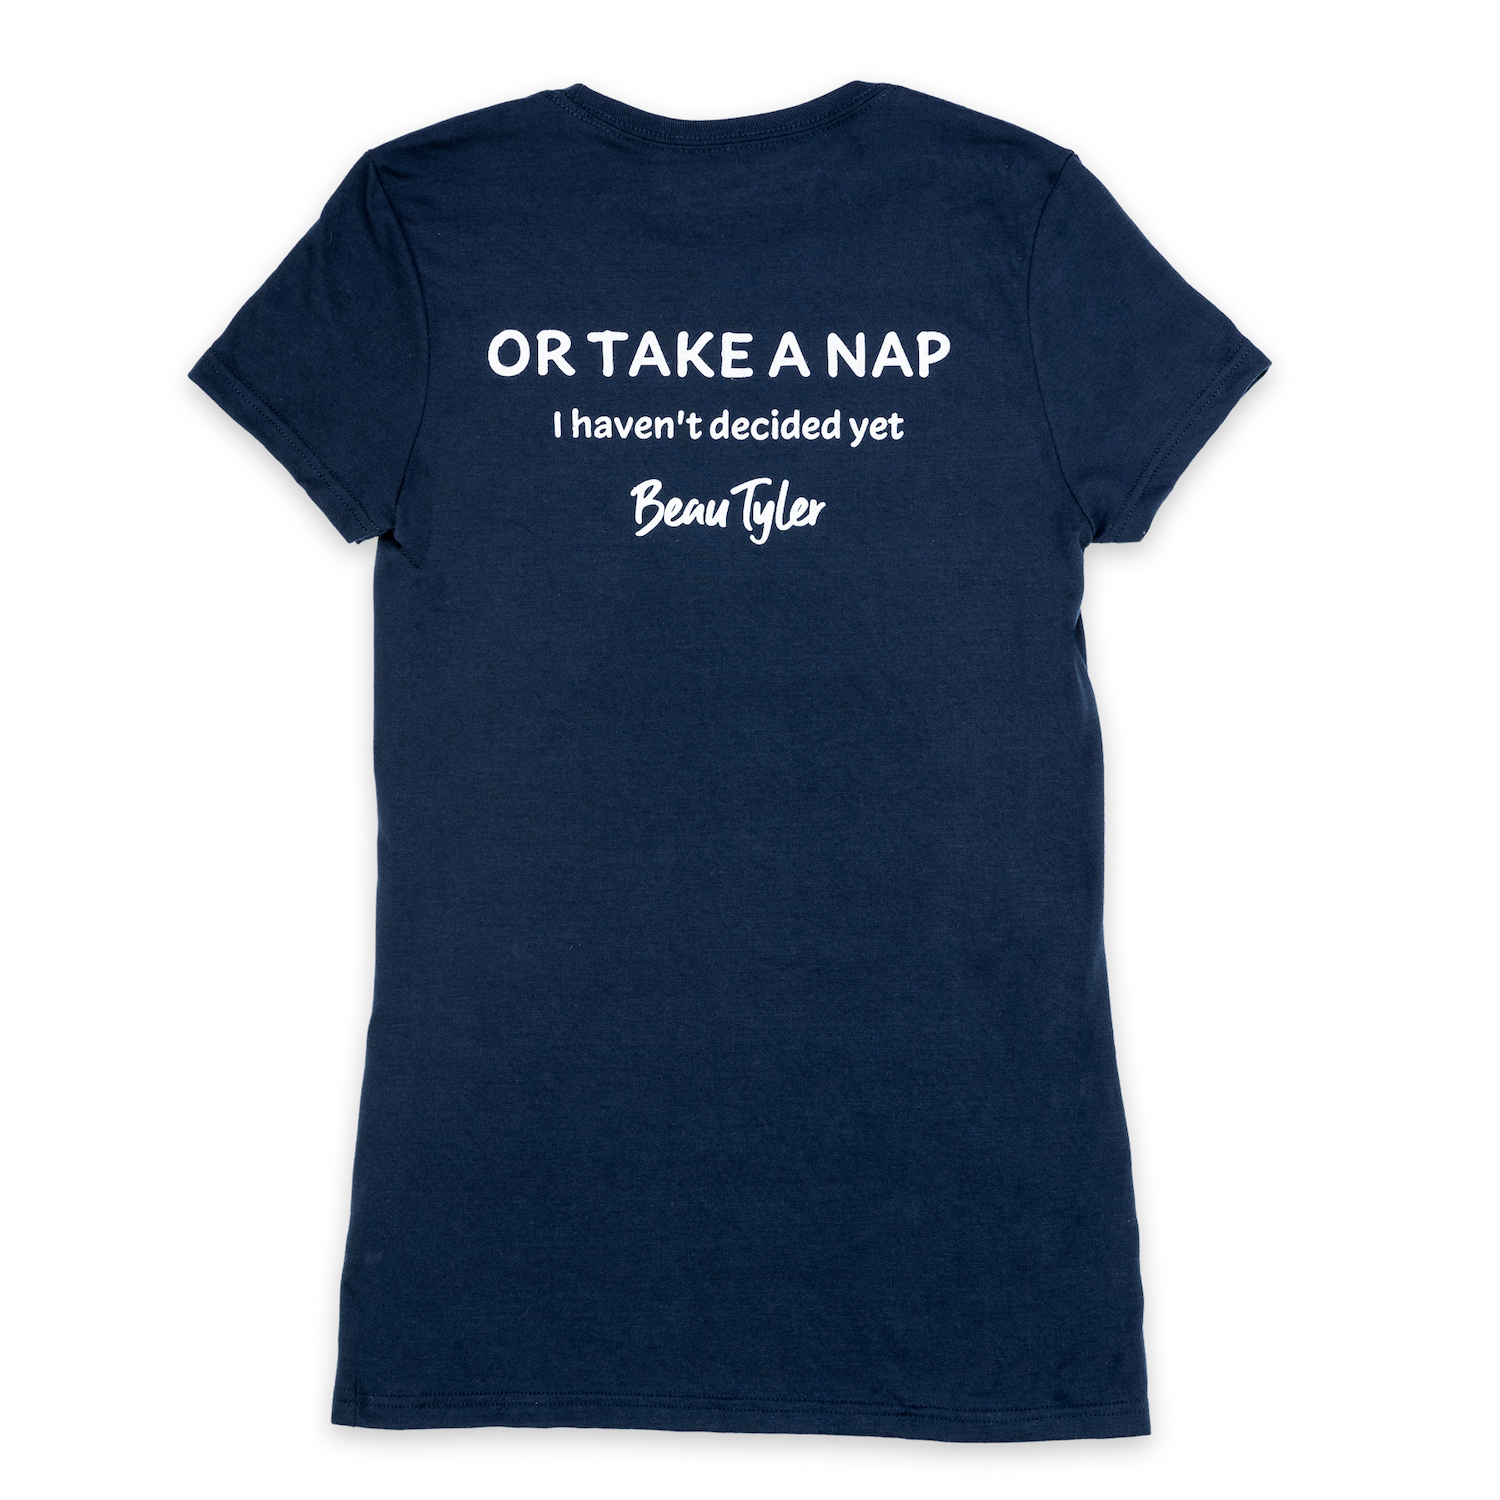 Beau Tyler - I'm here to change the world or take a nap shirt ladies back